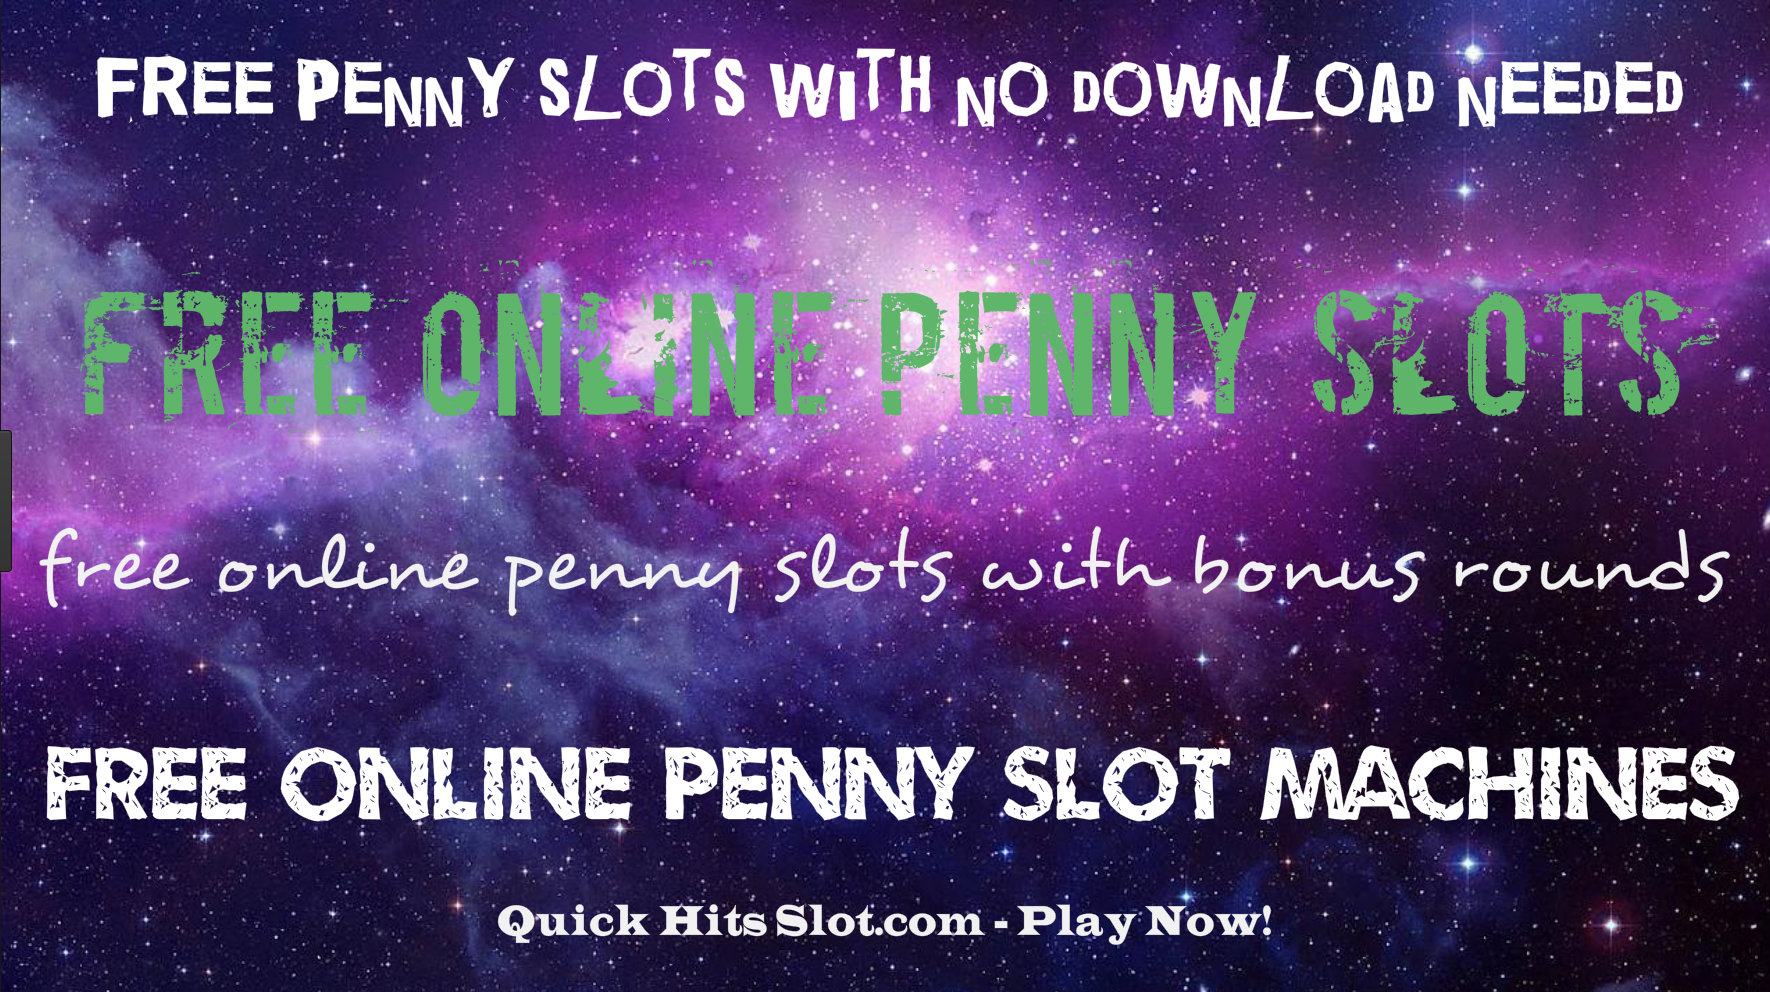 Free Online Penny Slot Machines